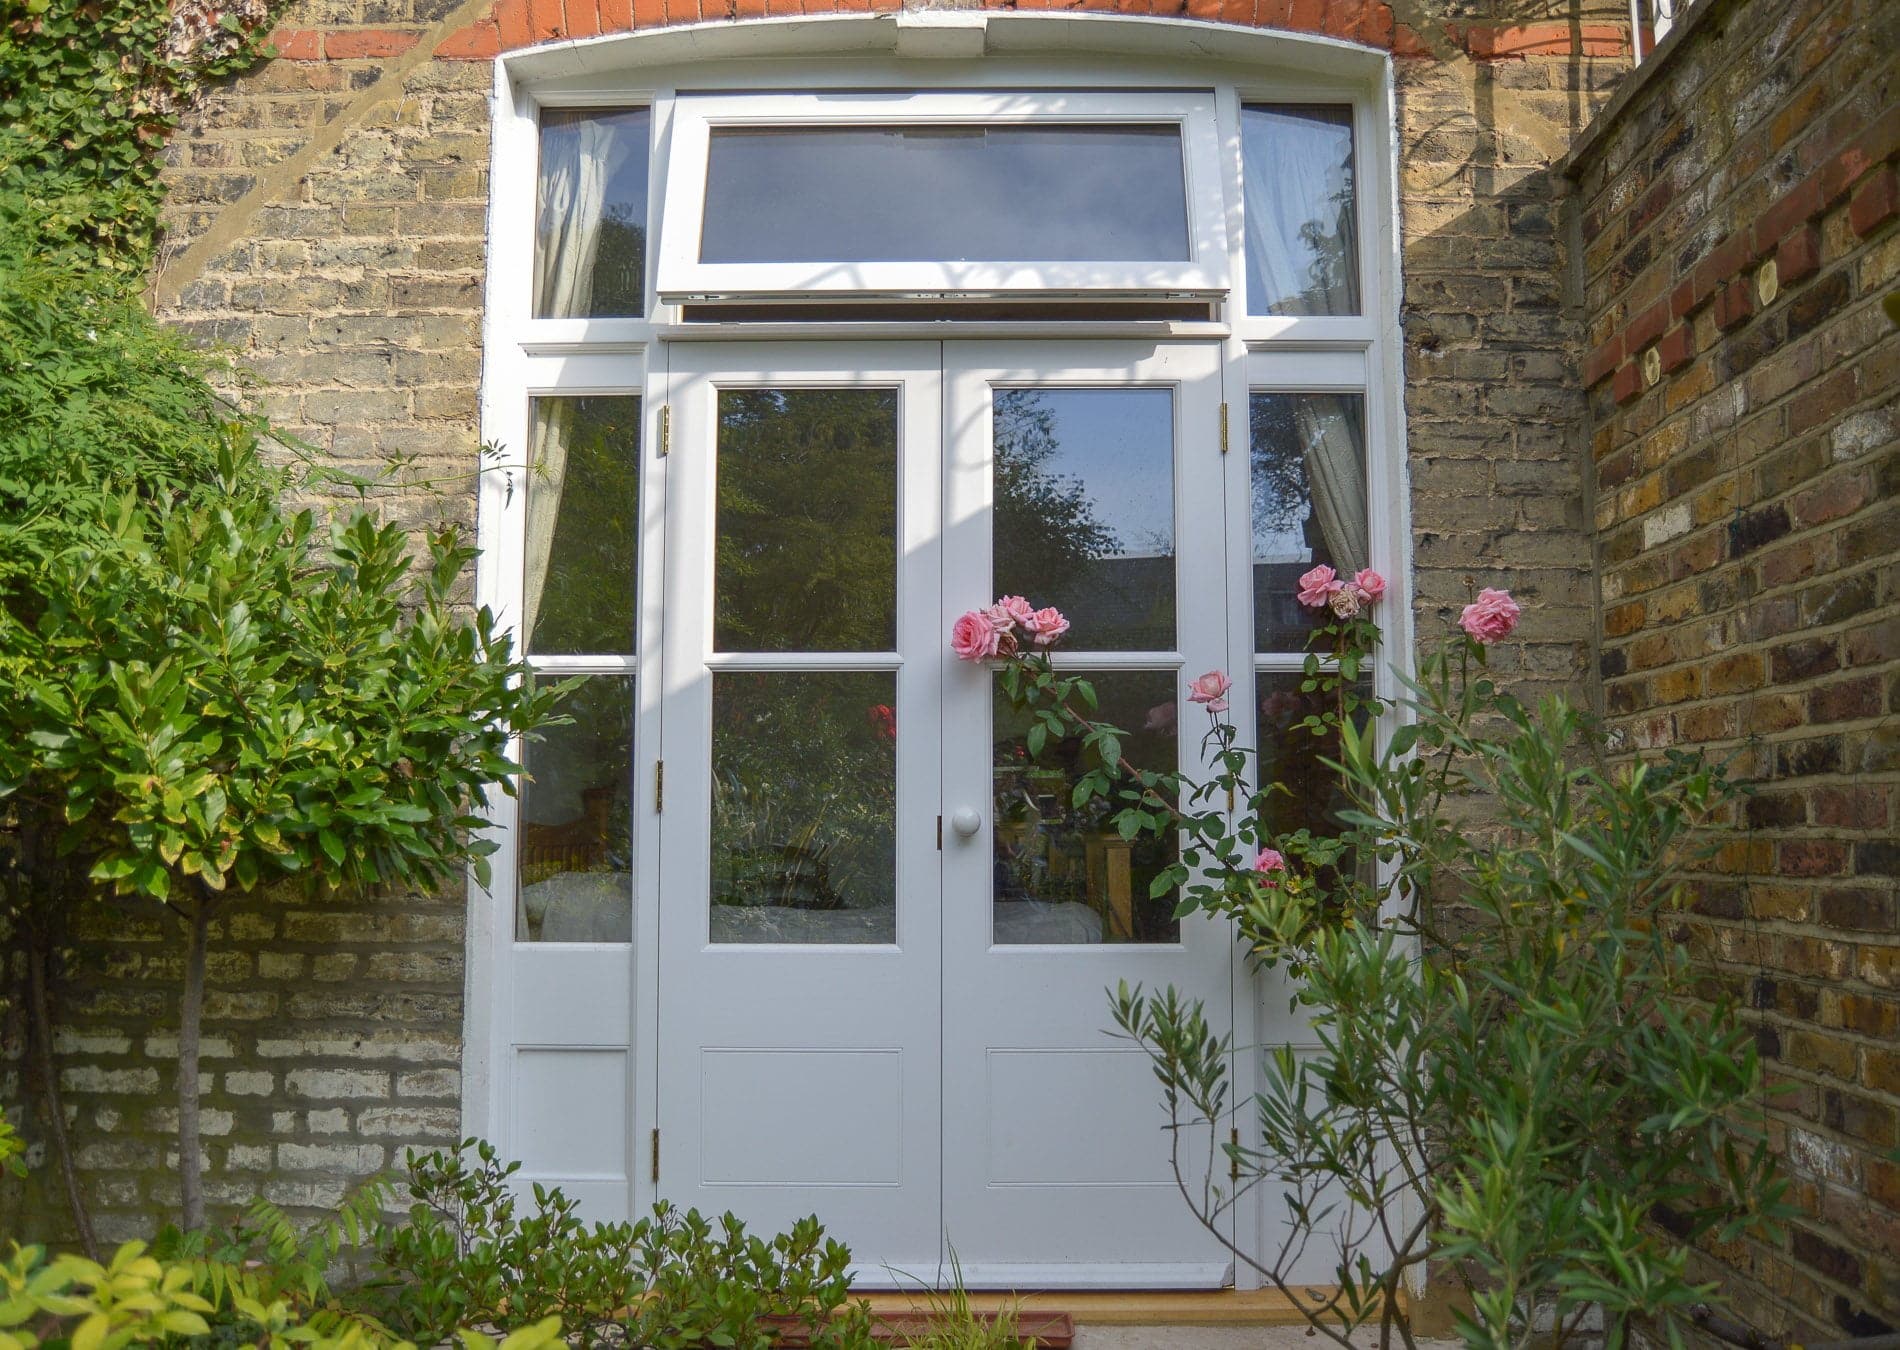 Bespoke french doors and sidelight frame. Painted white and double glazed. Opening fanlight above doors